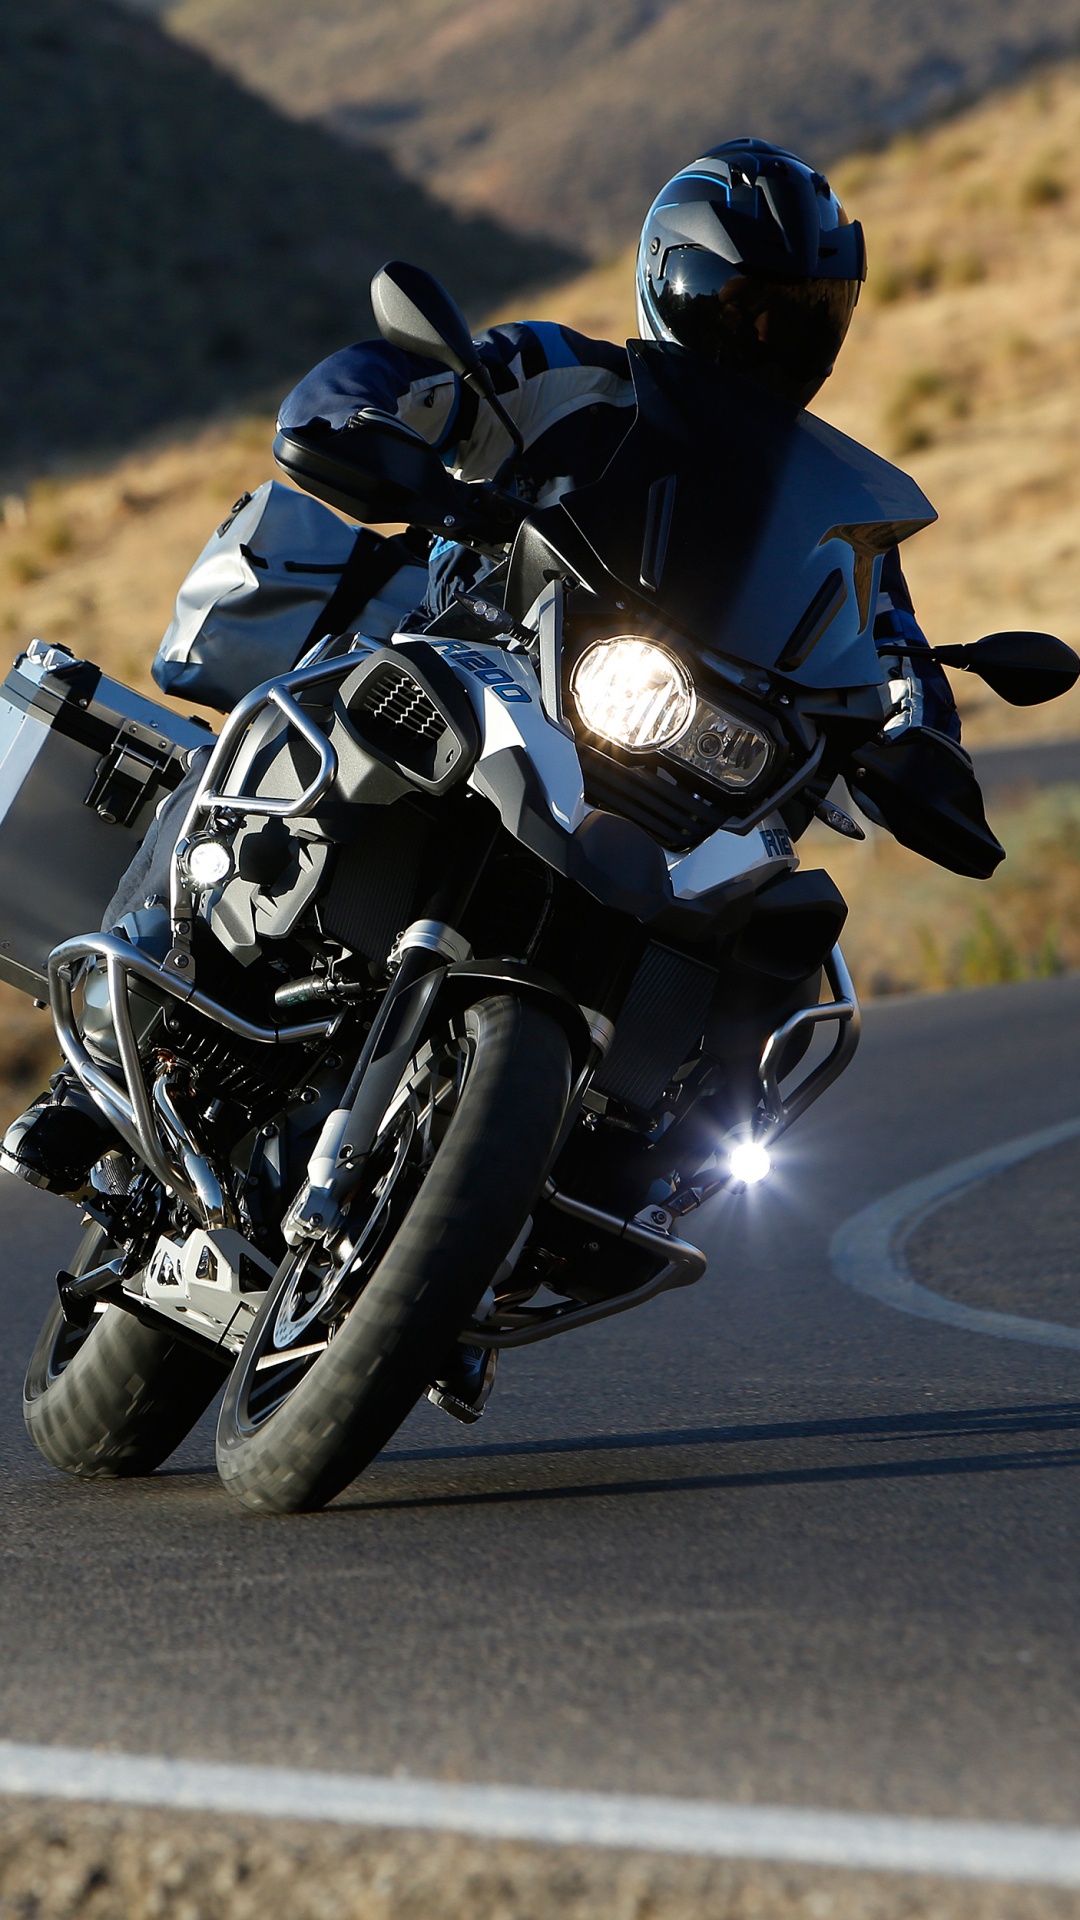 Man in Black Motorcycle Suit Riding Motorcycle on Road During Daytime. Wallpaper in 1080x1920 Resolution